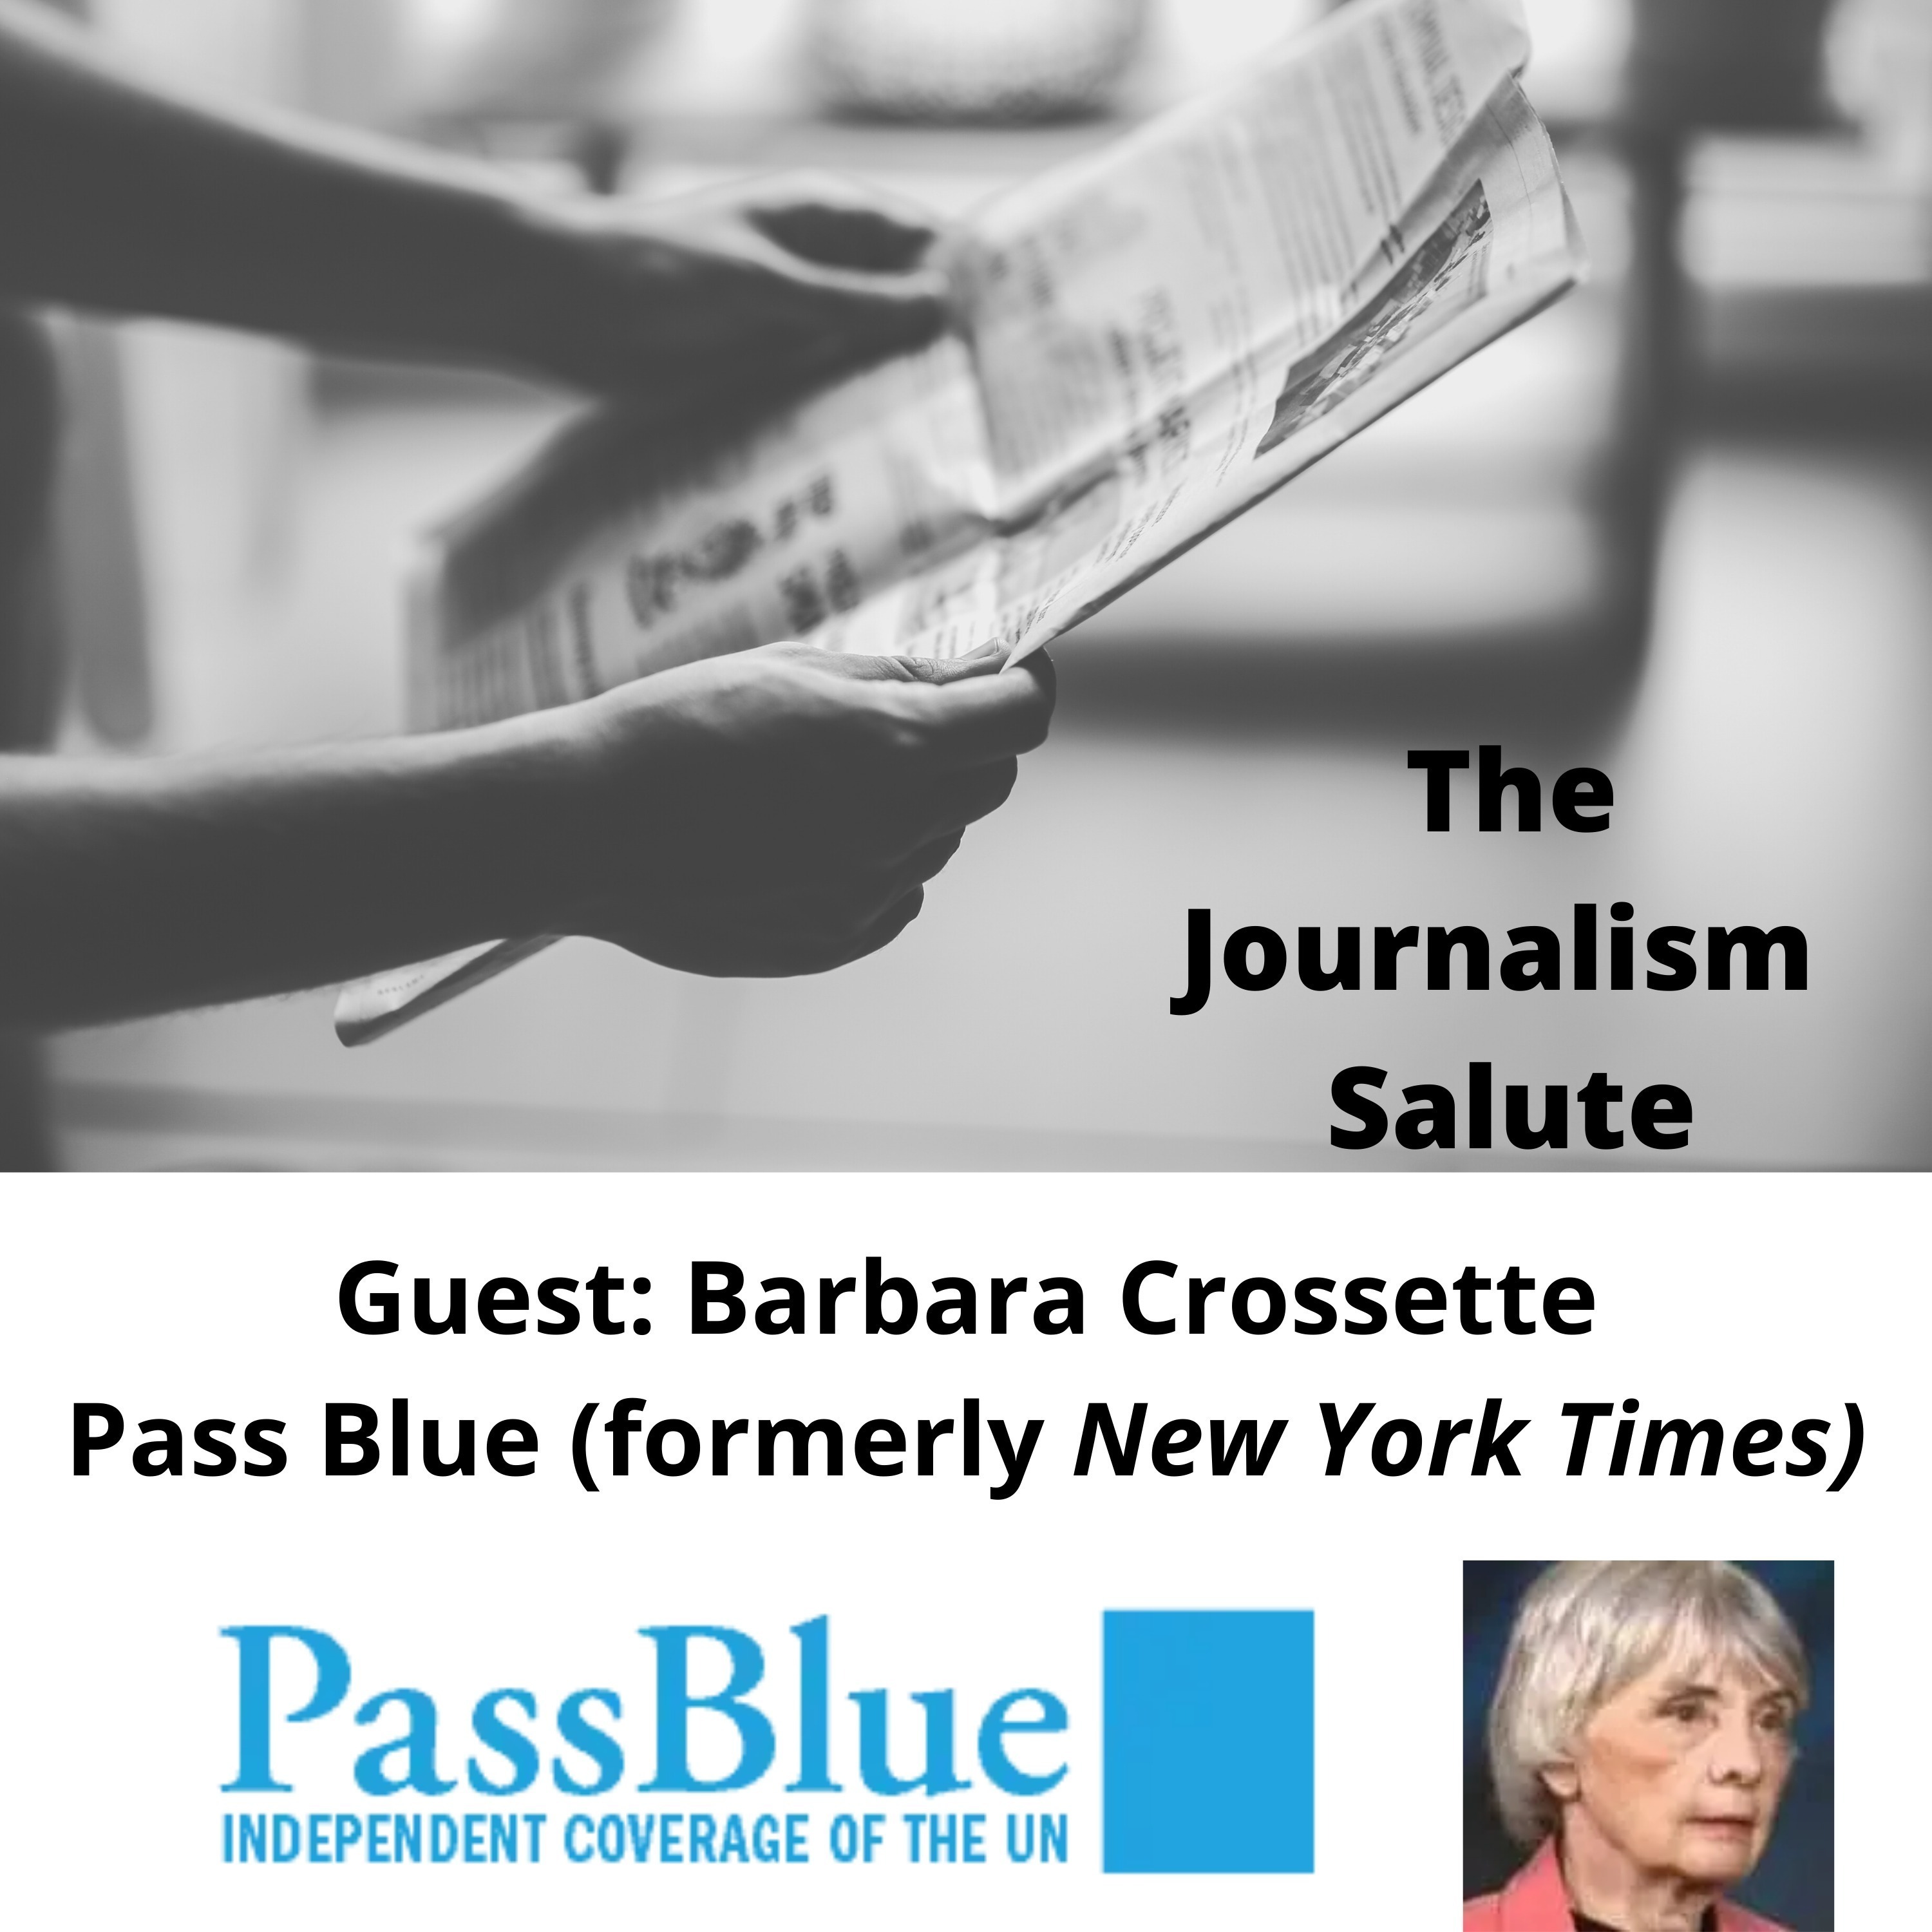 Barbara Crossette: Covering the U.N. for PassBlue to Round Out a 50+ Year Career